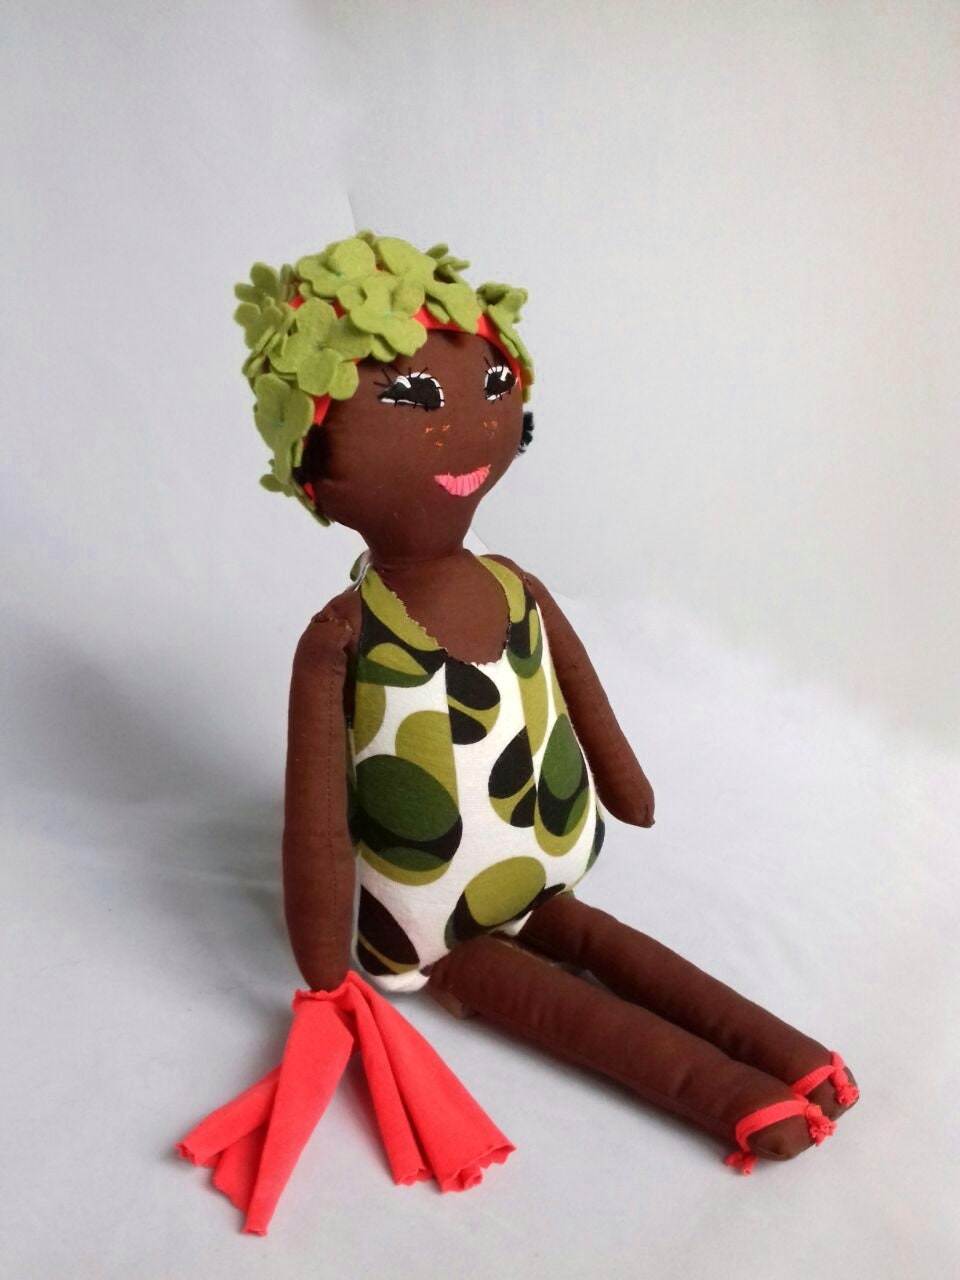 Bathing Rag Doll From the 60s Afro Handmade Doll in a 60s - Etsy